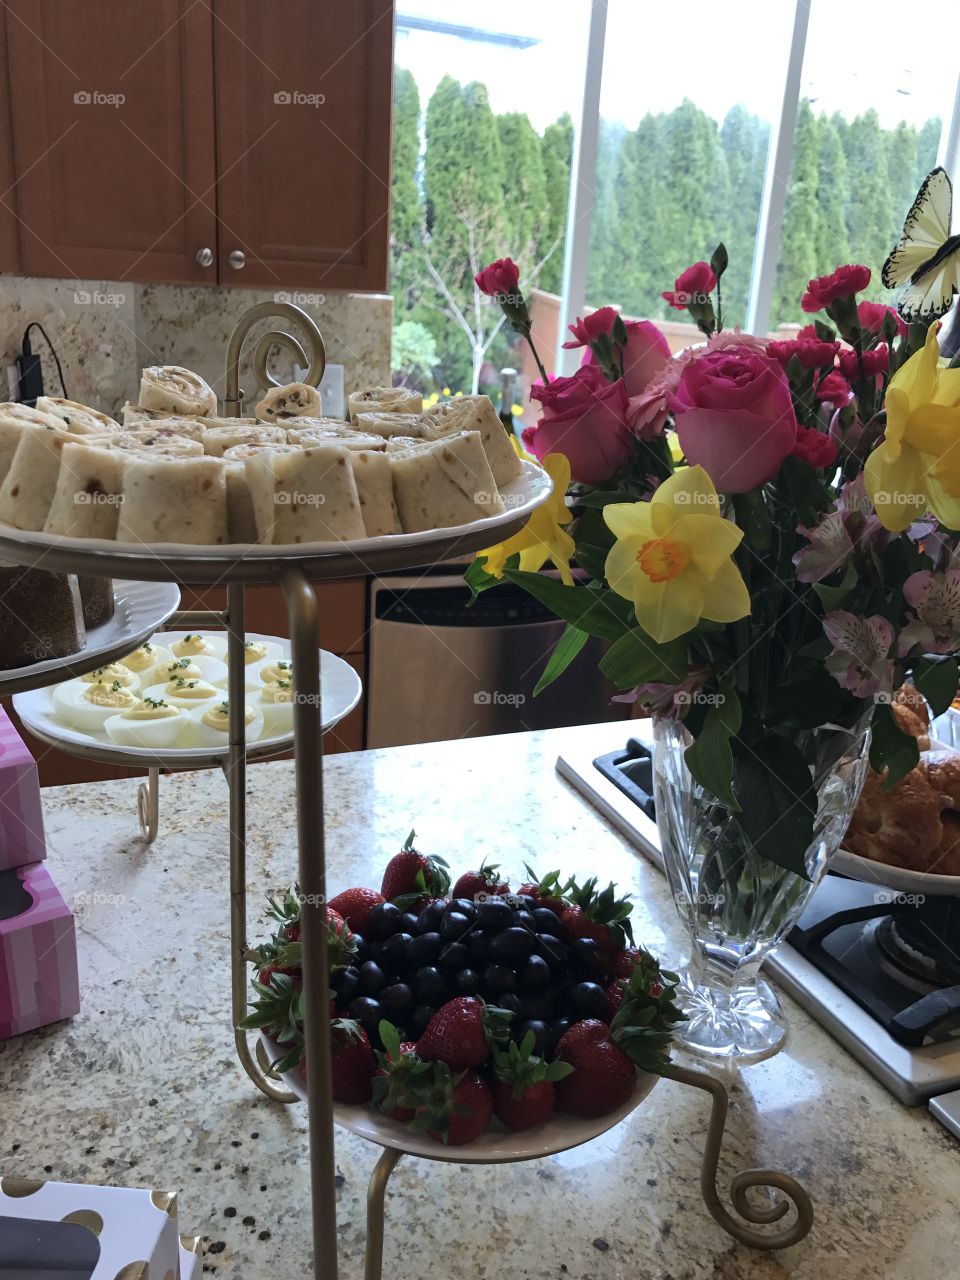 Afternoon tea party with delicious food. Deviled eggs, berries, strawberries, rolls